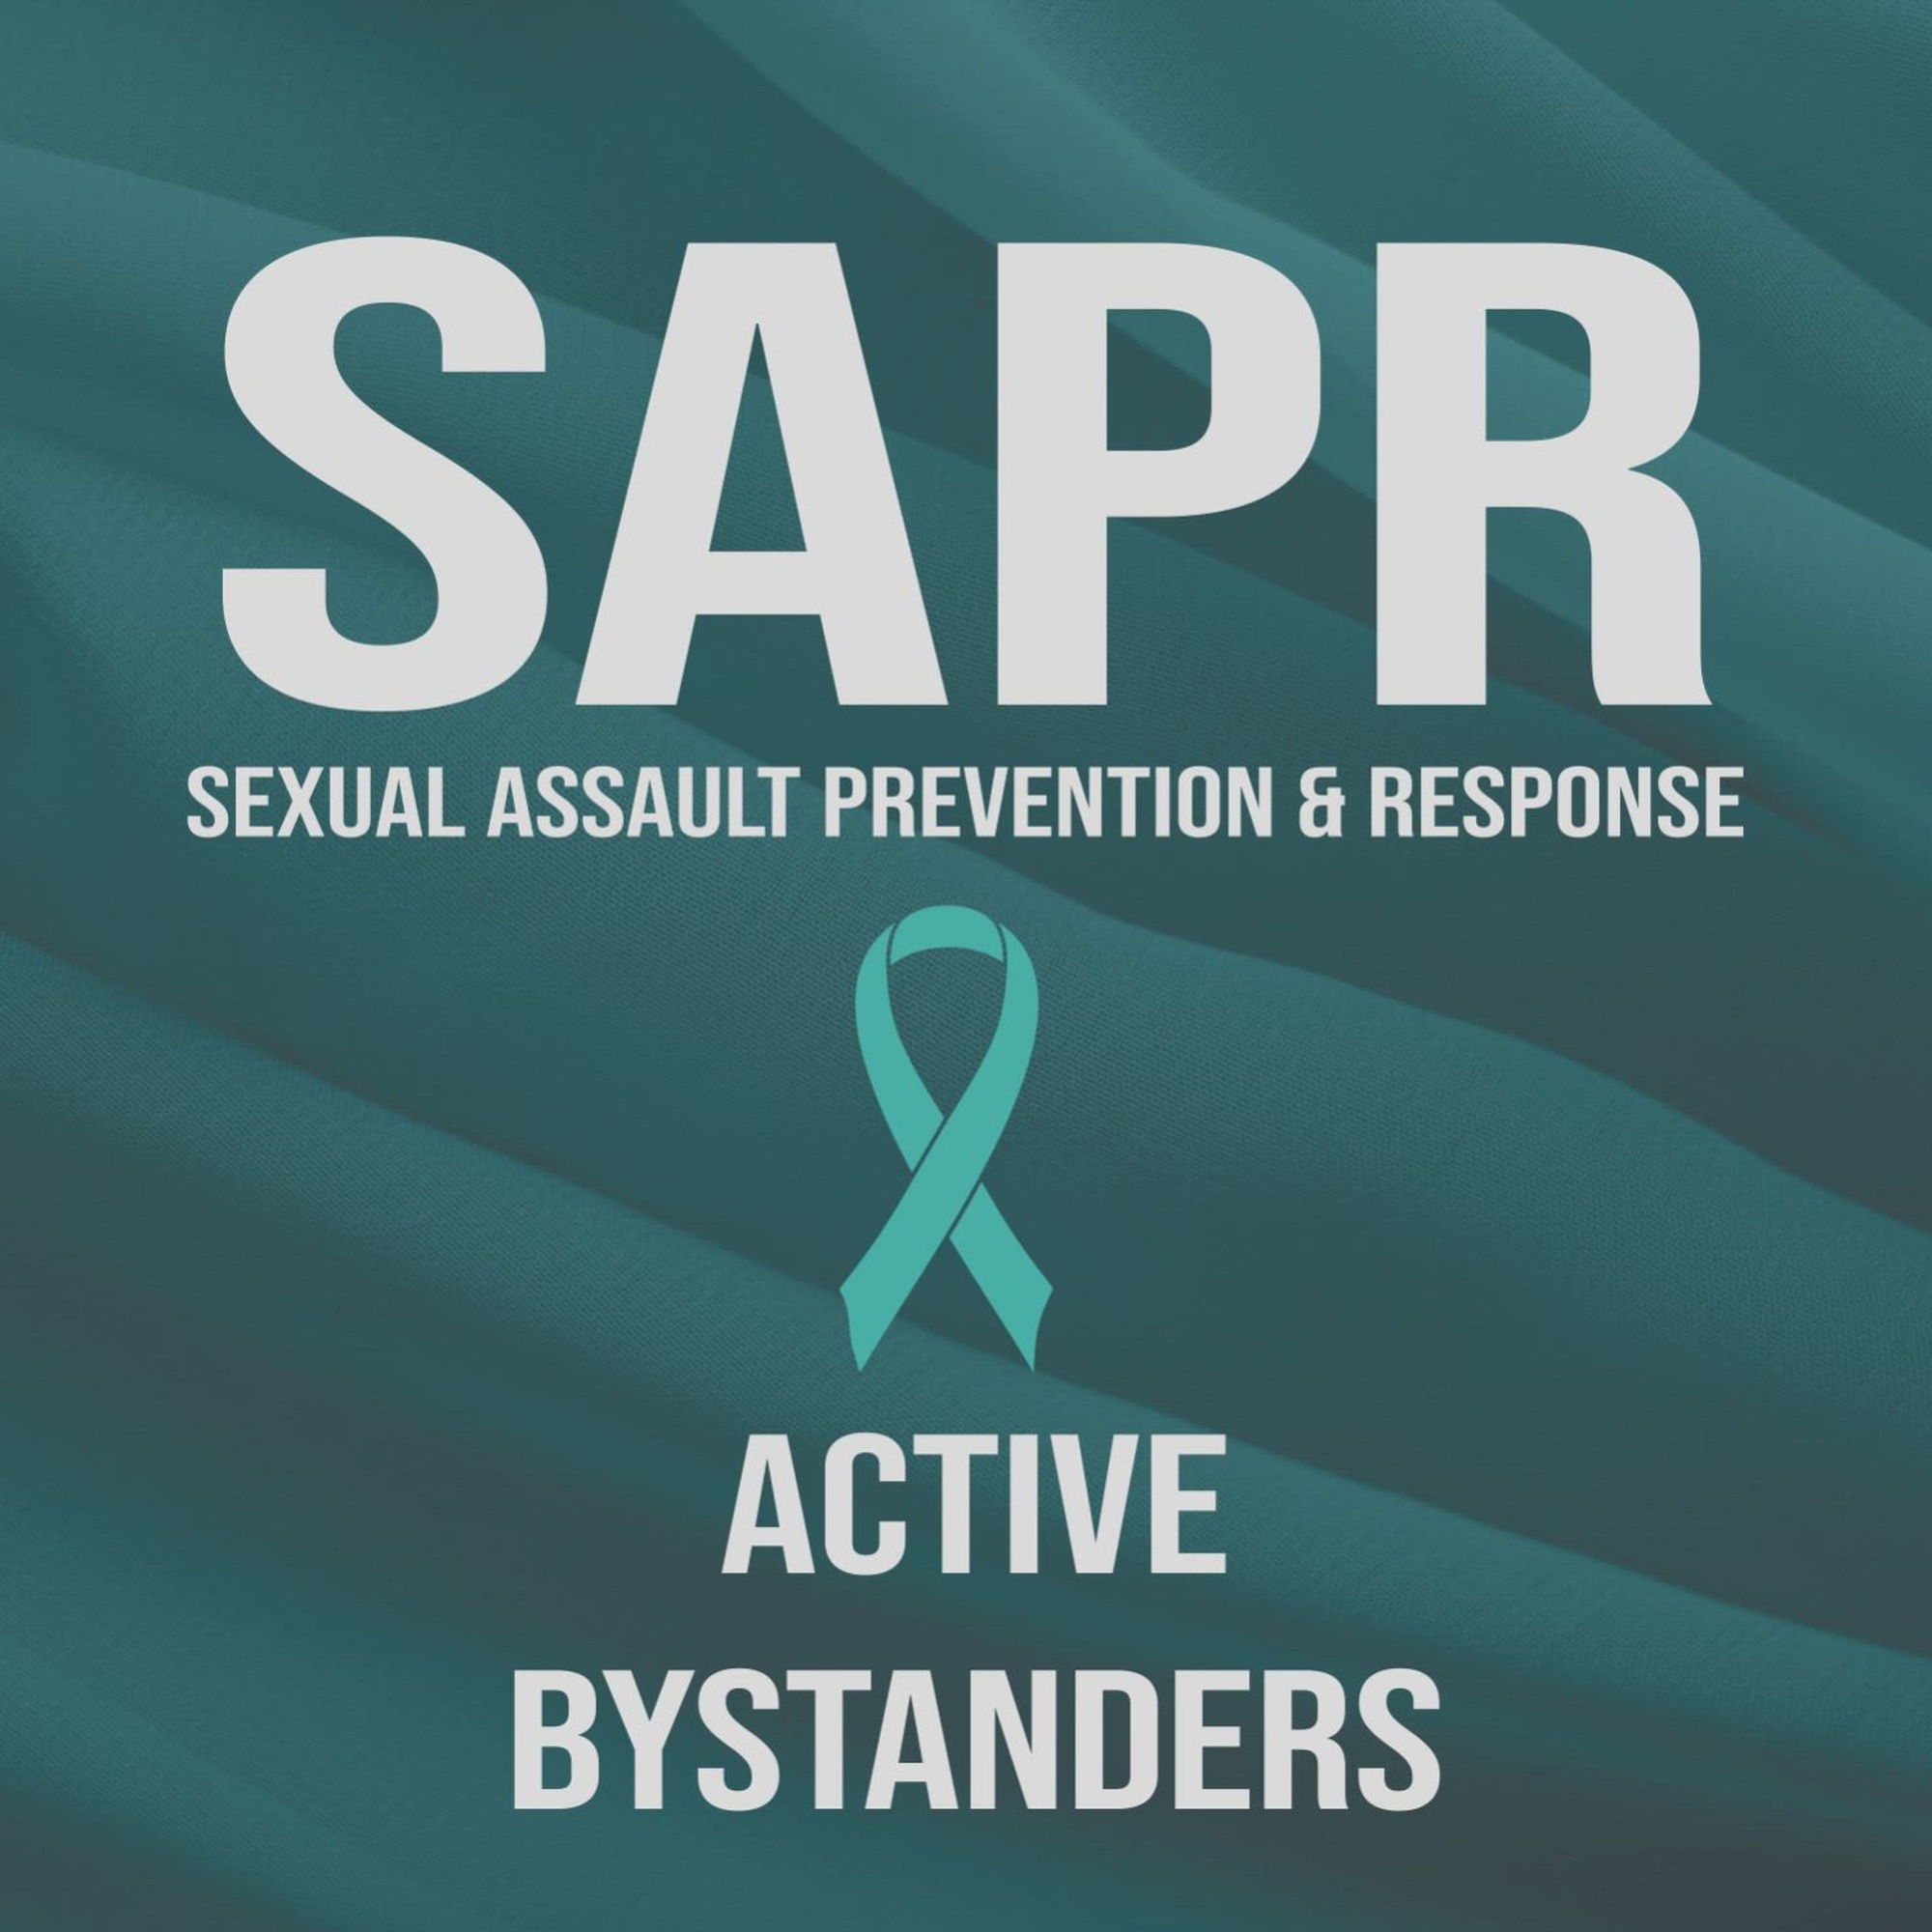 The animation shows information about how to be an active bystander and help prevent a sexual assault from occurring. This motion graphic was created on April 28, 2022, at Communication strategy and Operations, Marine Corps Base, Camp Pendleton. The animation is a product in support of Marine Corps Installations West, Marine Corps Base Camp Pendleton initiative to inform Marines about how bystanders can step in and prevent sexual assault for Sexual Assault Prevention and Response (SAPR). (U.S. Marine Corps graphic created by Pfc. Alicia Childs)